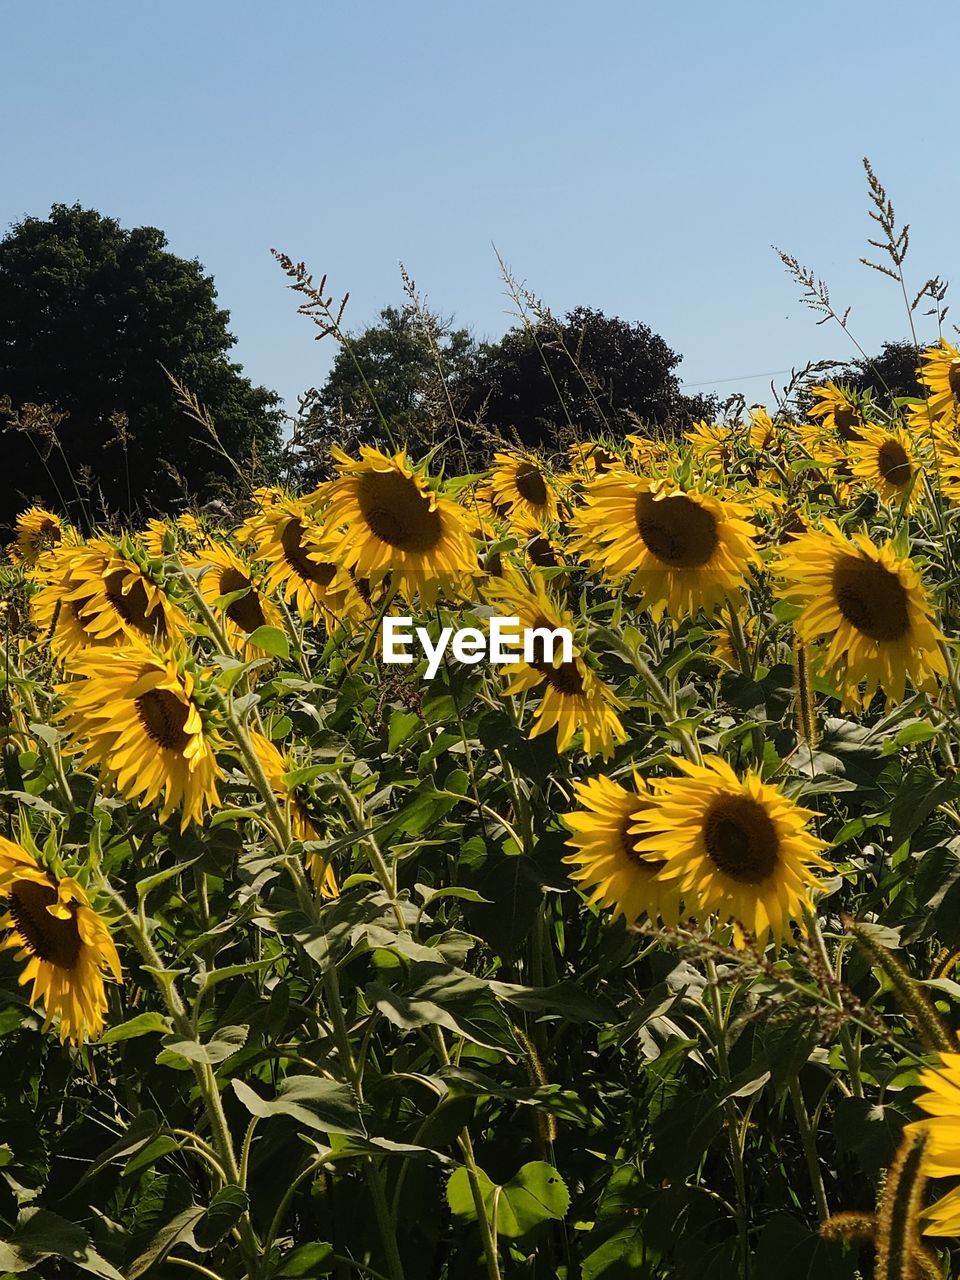 plant, sunflower, yellow, flower, growth, flowering plant, beauty in nature, nature, freshness, flower head, sky, no people, fragility, inflorescence, low angle view, day, tree, outdoors, close-up, field, green, clear sky, petal, leaf, plant part, sunlight, botany